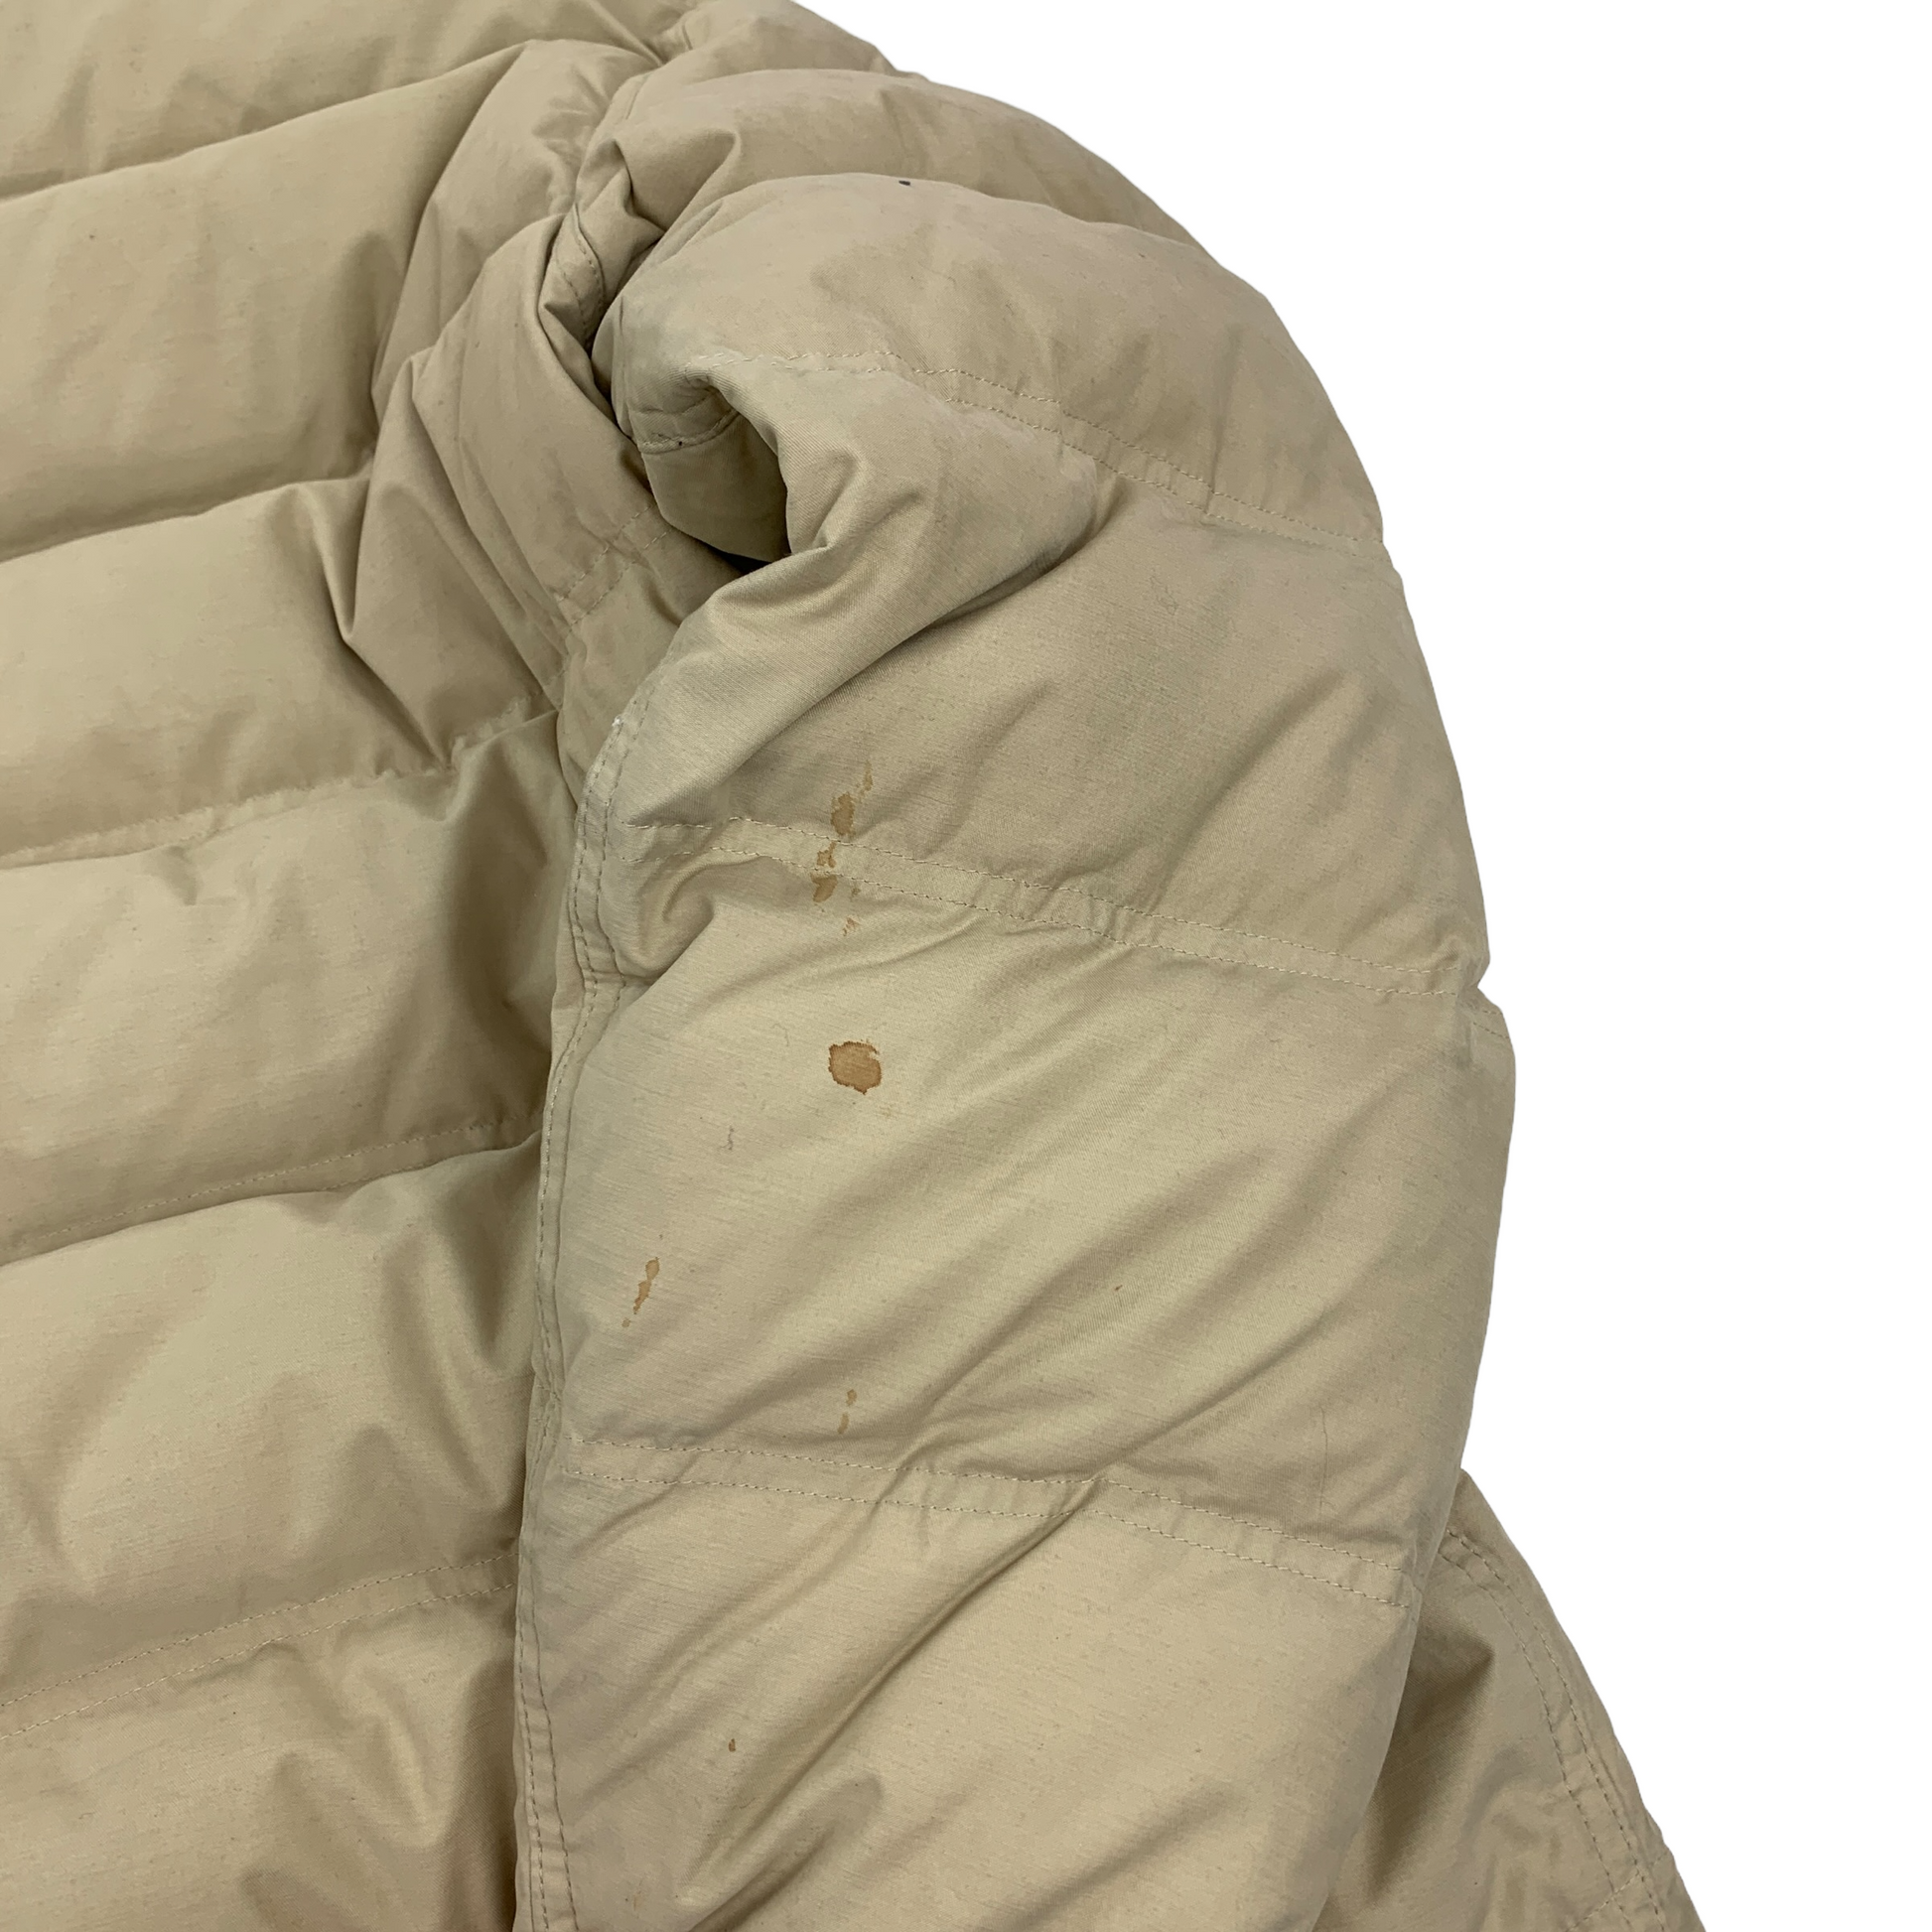 Timberland Puffer Jacket-Other Brands-pufferseason-secondhand-shop-austria-vintage-puffer-down-coat-sustainable